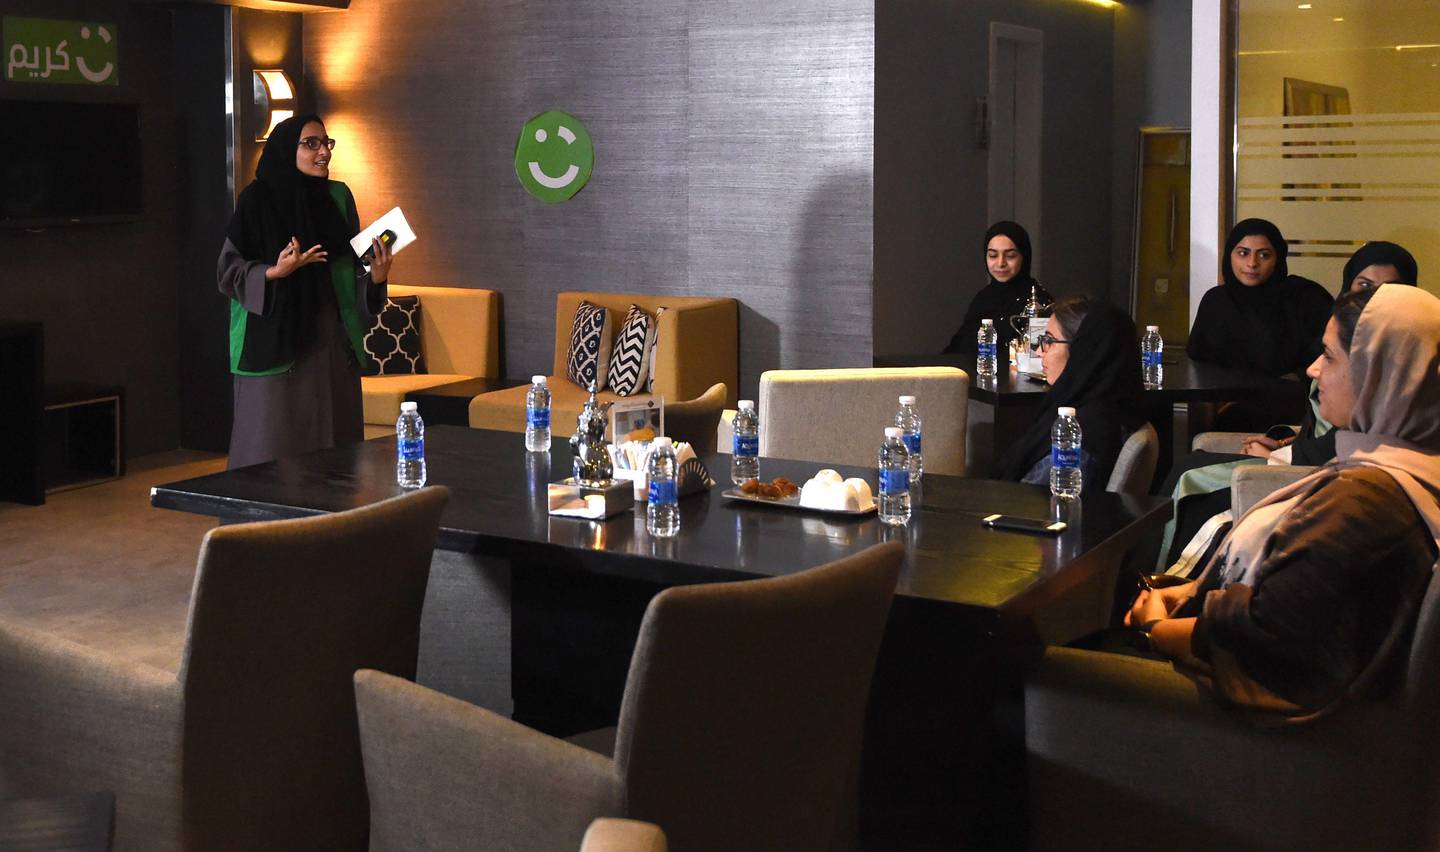 An employee of Careem, a chauffeur driven car booking service, talks during a training session for new female drivers, known in the company as "captains", at their Saudi offices in Khobar City, some 424 kilometres east of the Saudi capital of Riyadh, on October 10, 2017. 
Saudi Arabia's decision to allow women to drive had some sounding the death knell for ride-hailing apps like Careem, but its co-founder expects business to flourish and even plans to hire thousands of female drivers. / AFP PHOTO / FAYEZ NURELDINE